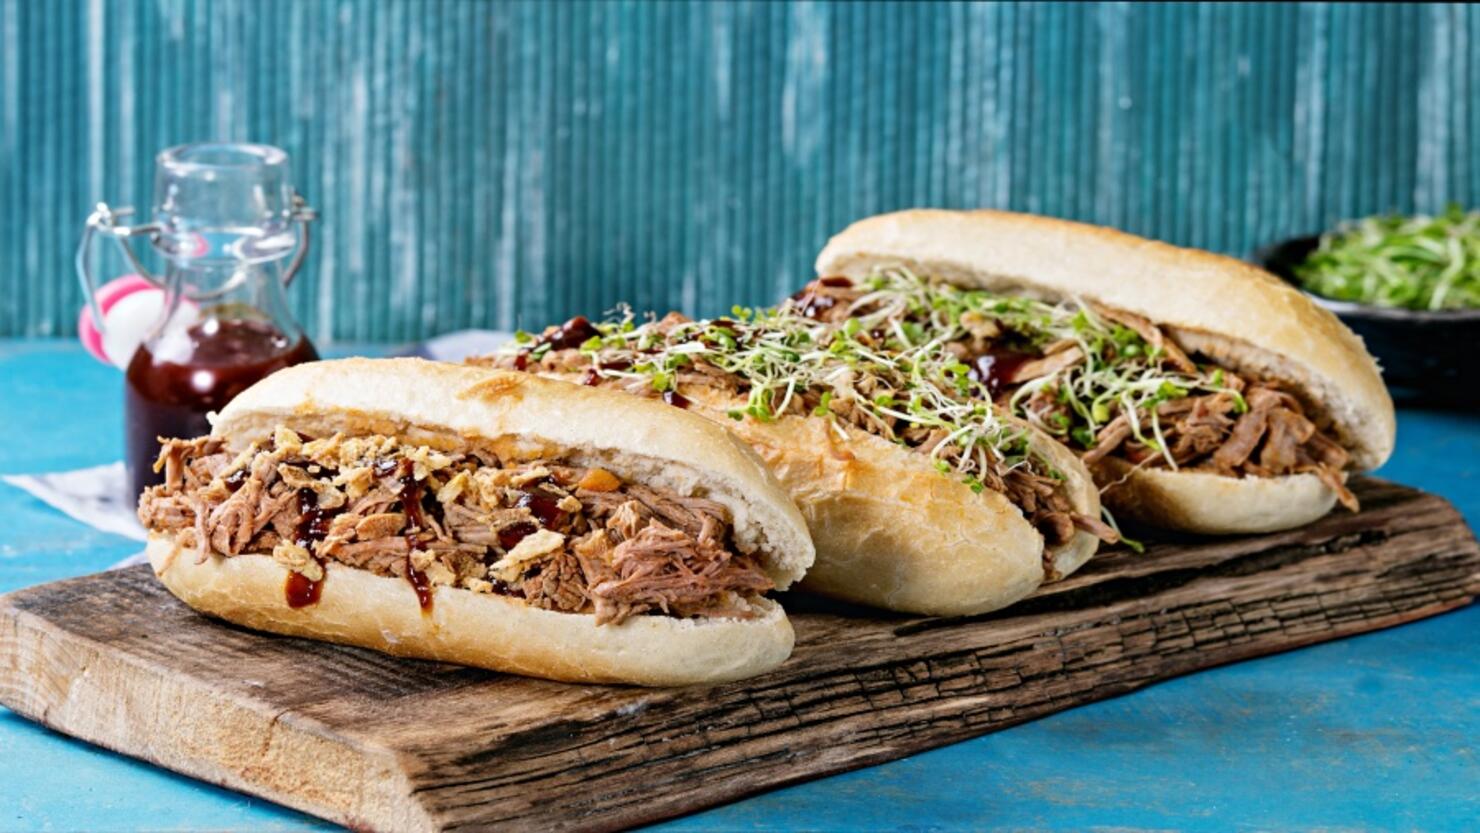 Variety of pulled pork sandwiches with meat, fried onion, green sprouts and bbq ketchup, served on wood cutting board with small bottle of tomato sauce over bright blue wooden background.